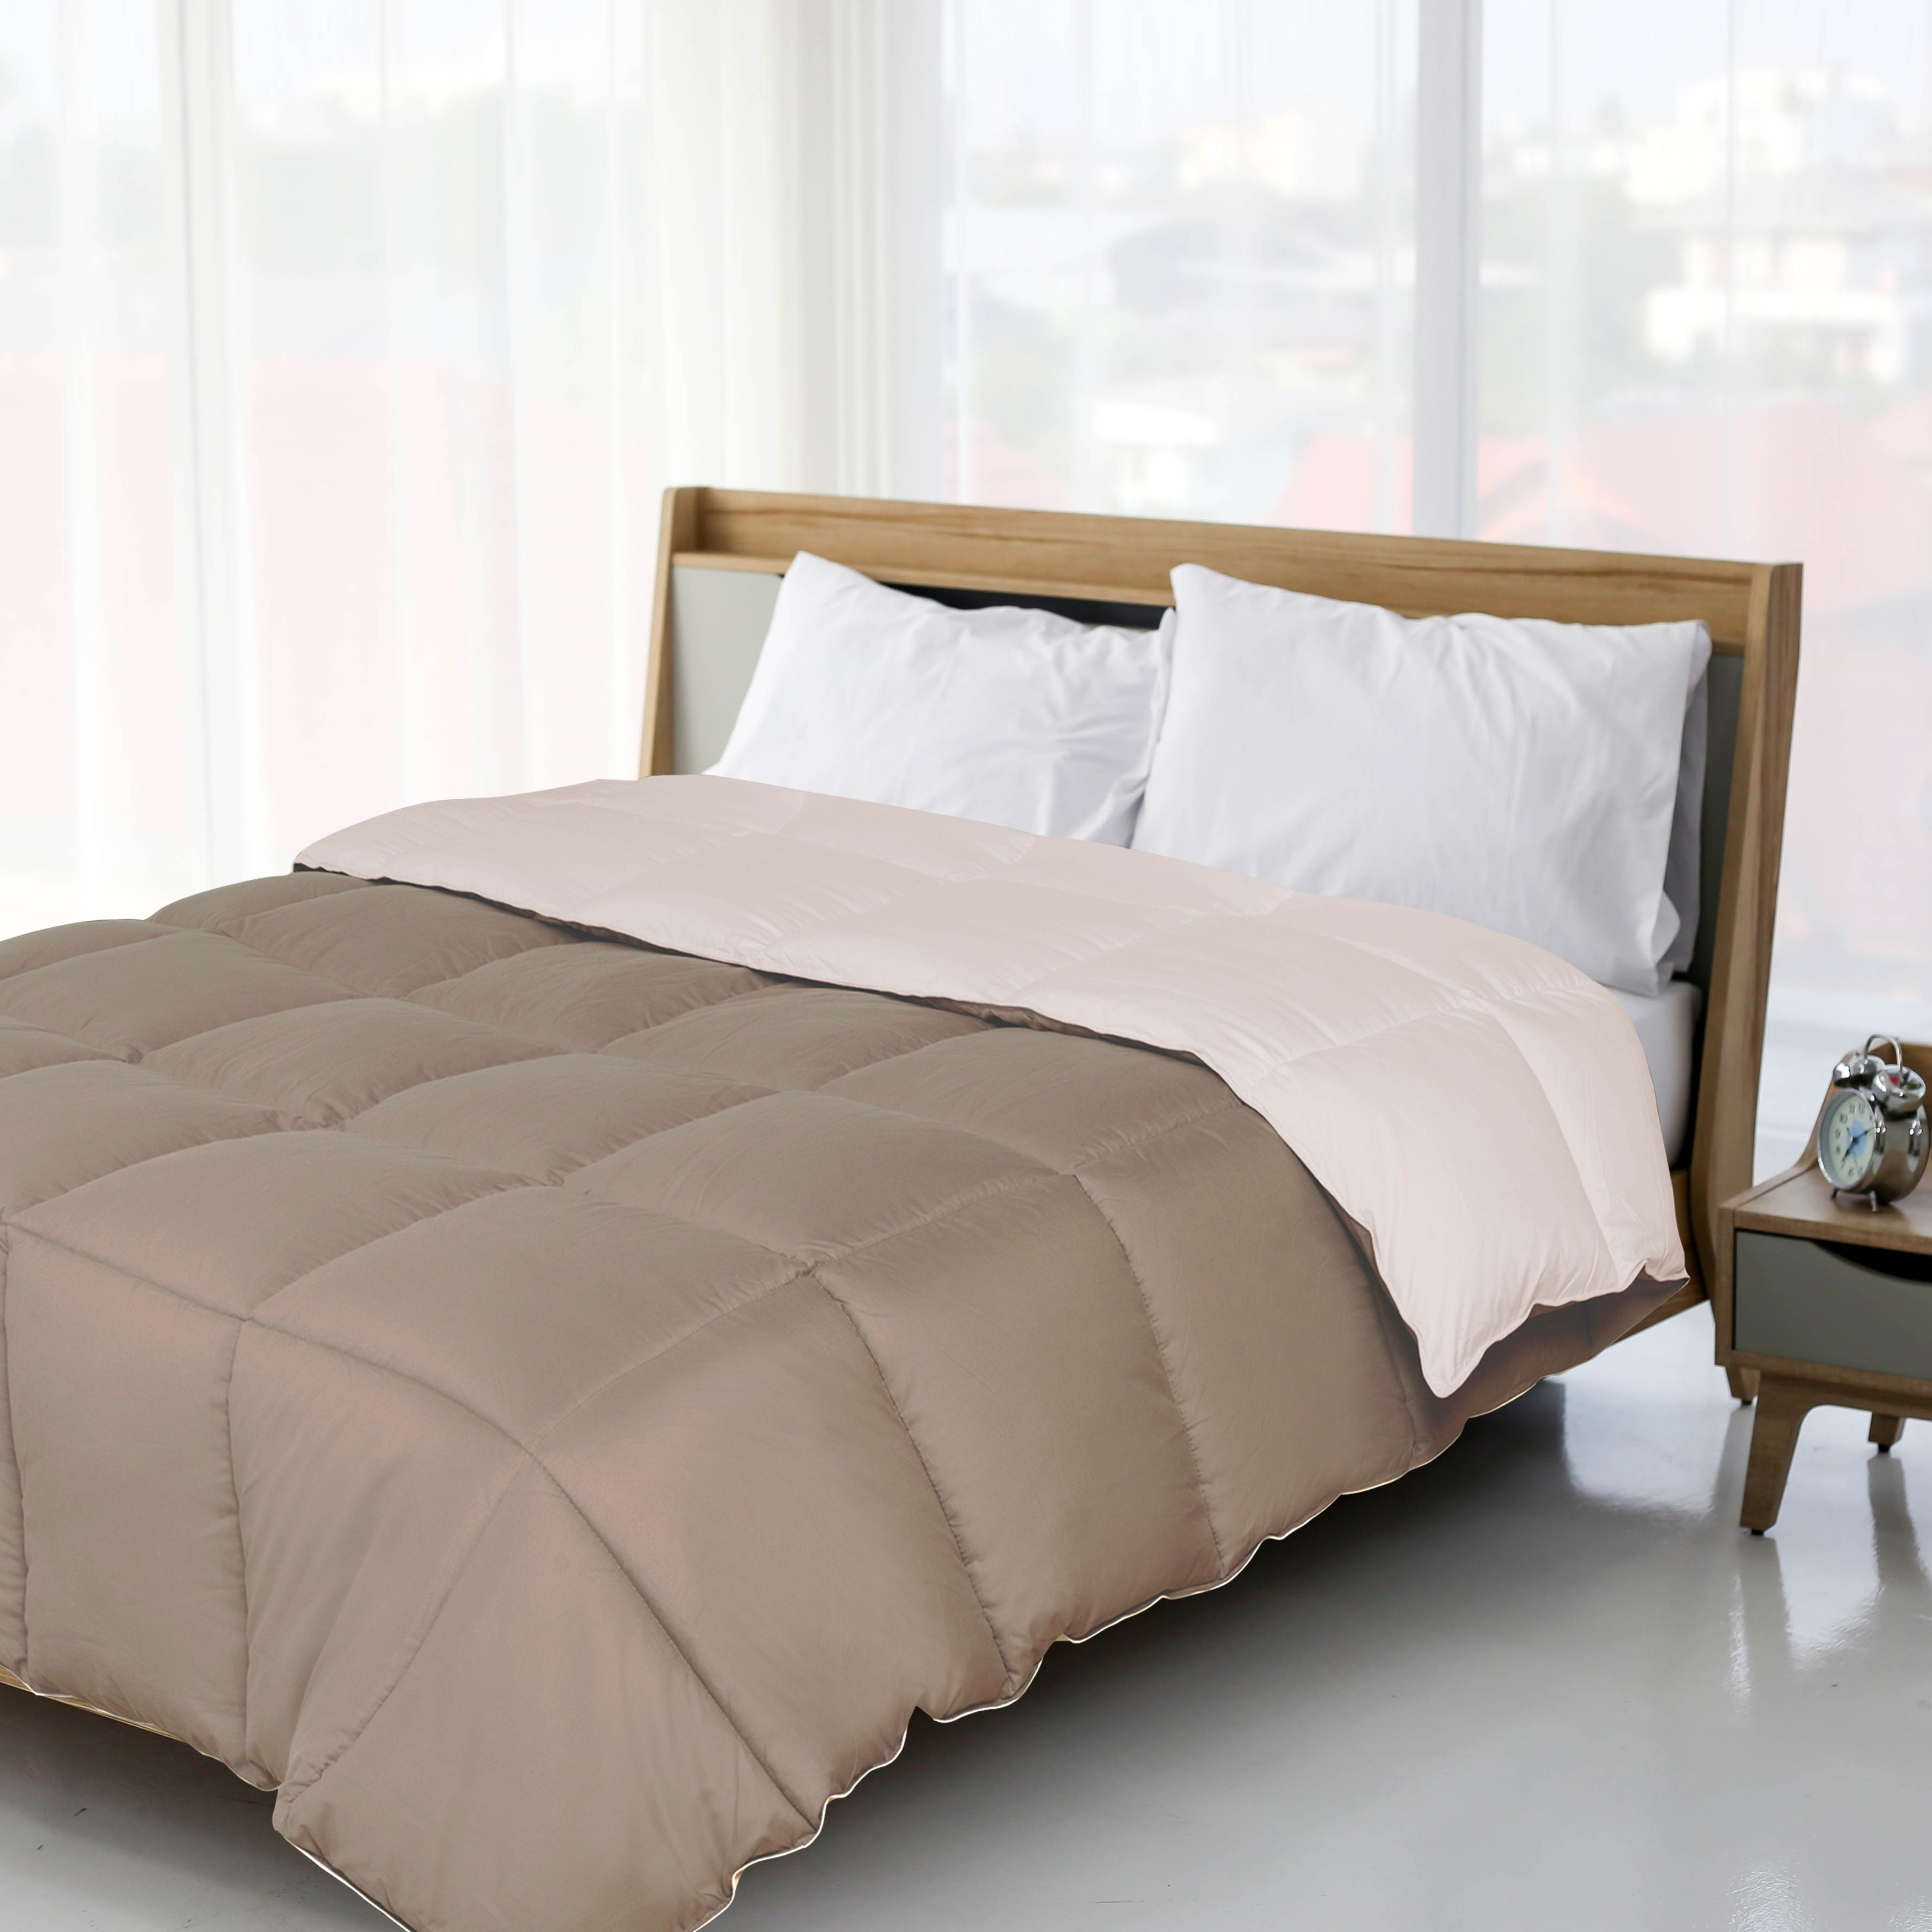 Superior Down Alternative Reversible Ivory-Taupe Comforter, King - image 2 of 4